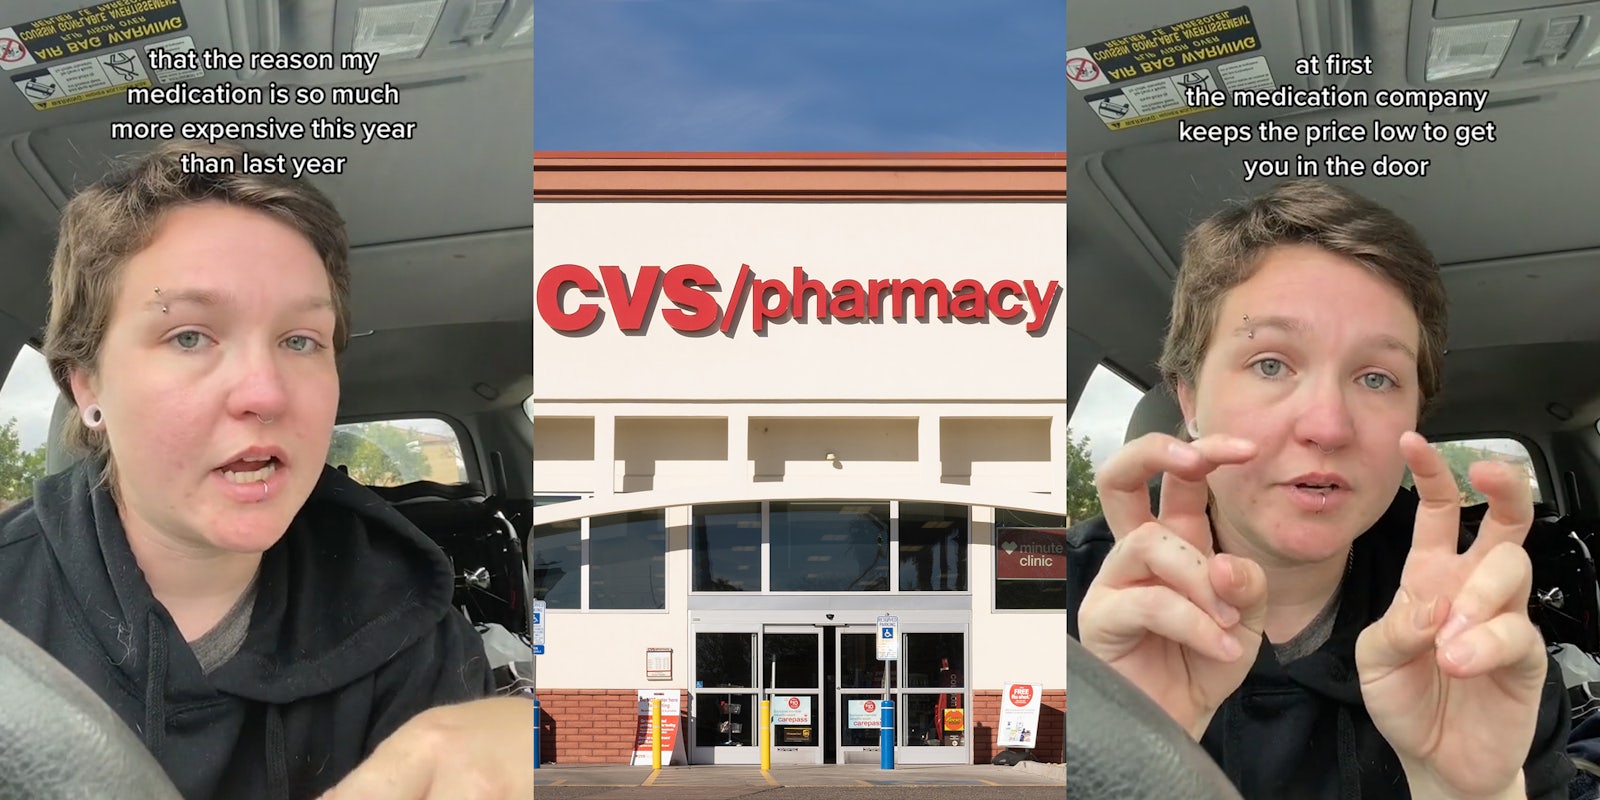 CVS customer speaking in car with caption 'that the reason my medication is so much more expensive this year than last year' (l) CVS Pharmacy building with sign and blue sky (c) CVS customer speaking in car with caption 'at first the medication company keeps the price low to get you in the door' (r)